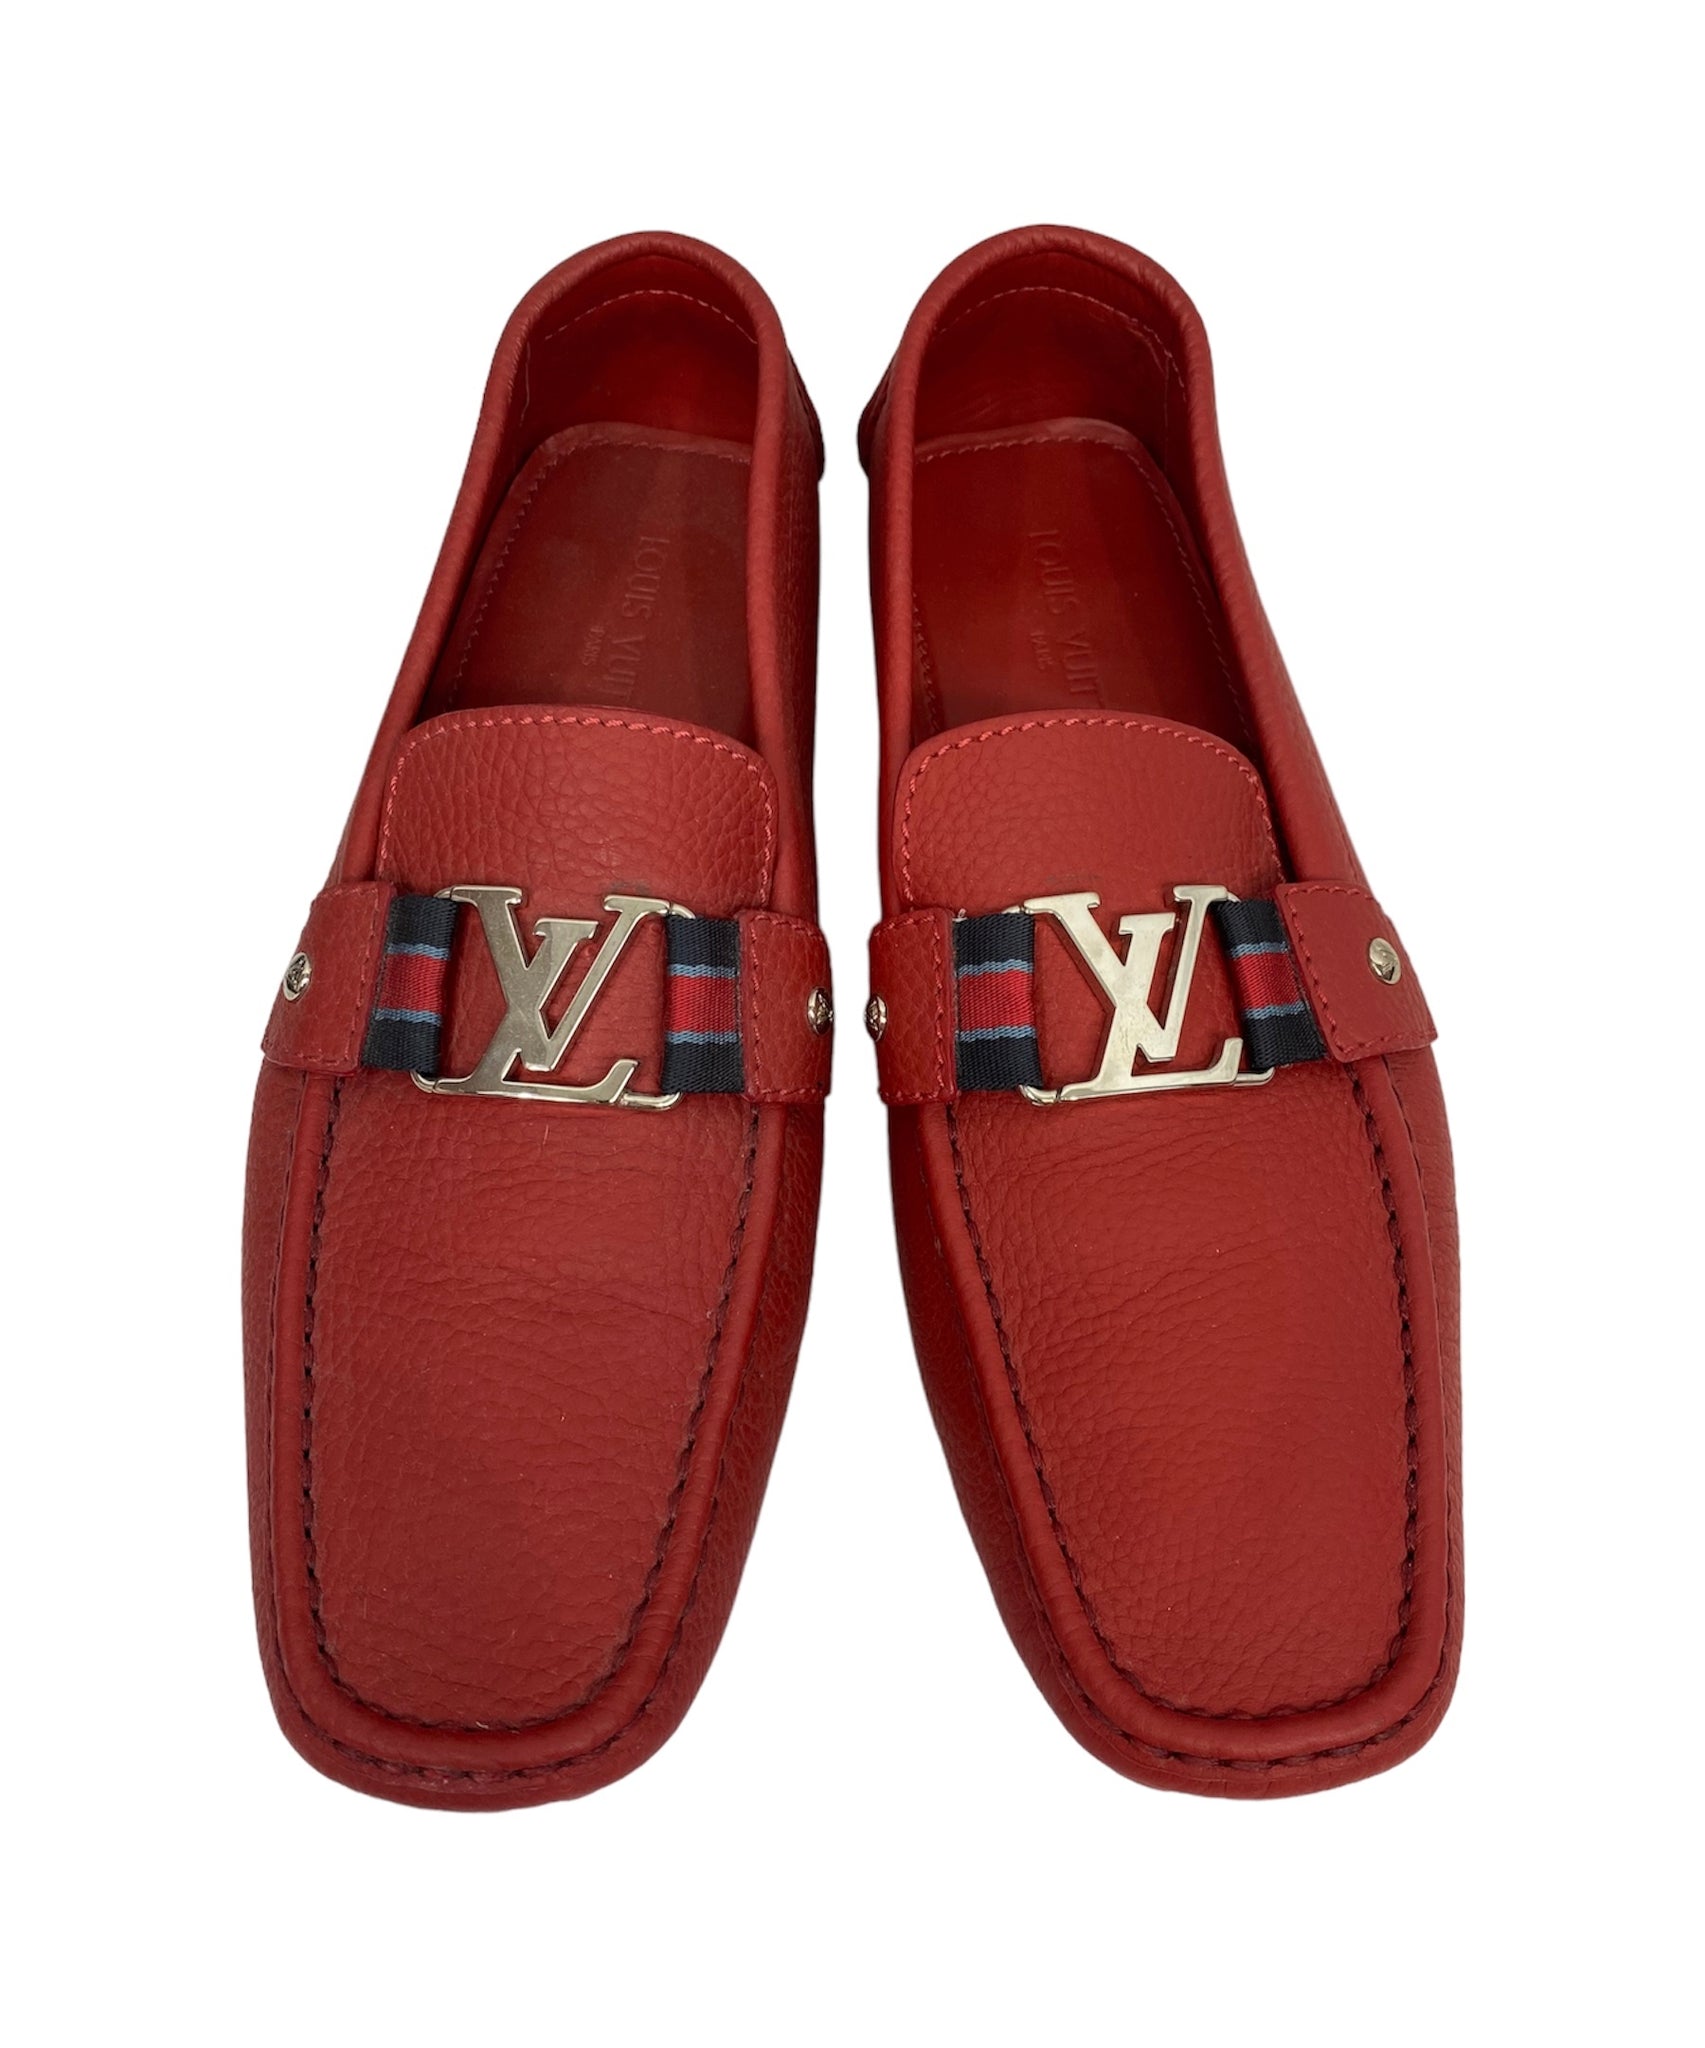 Louis Vuitton, Shoes, 9890 Louis Vuitton Luxury Cherry Red Mens Shoes  Loafers Us Size 8